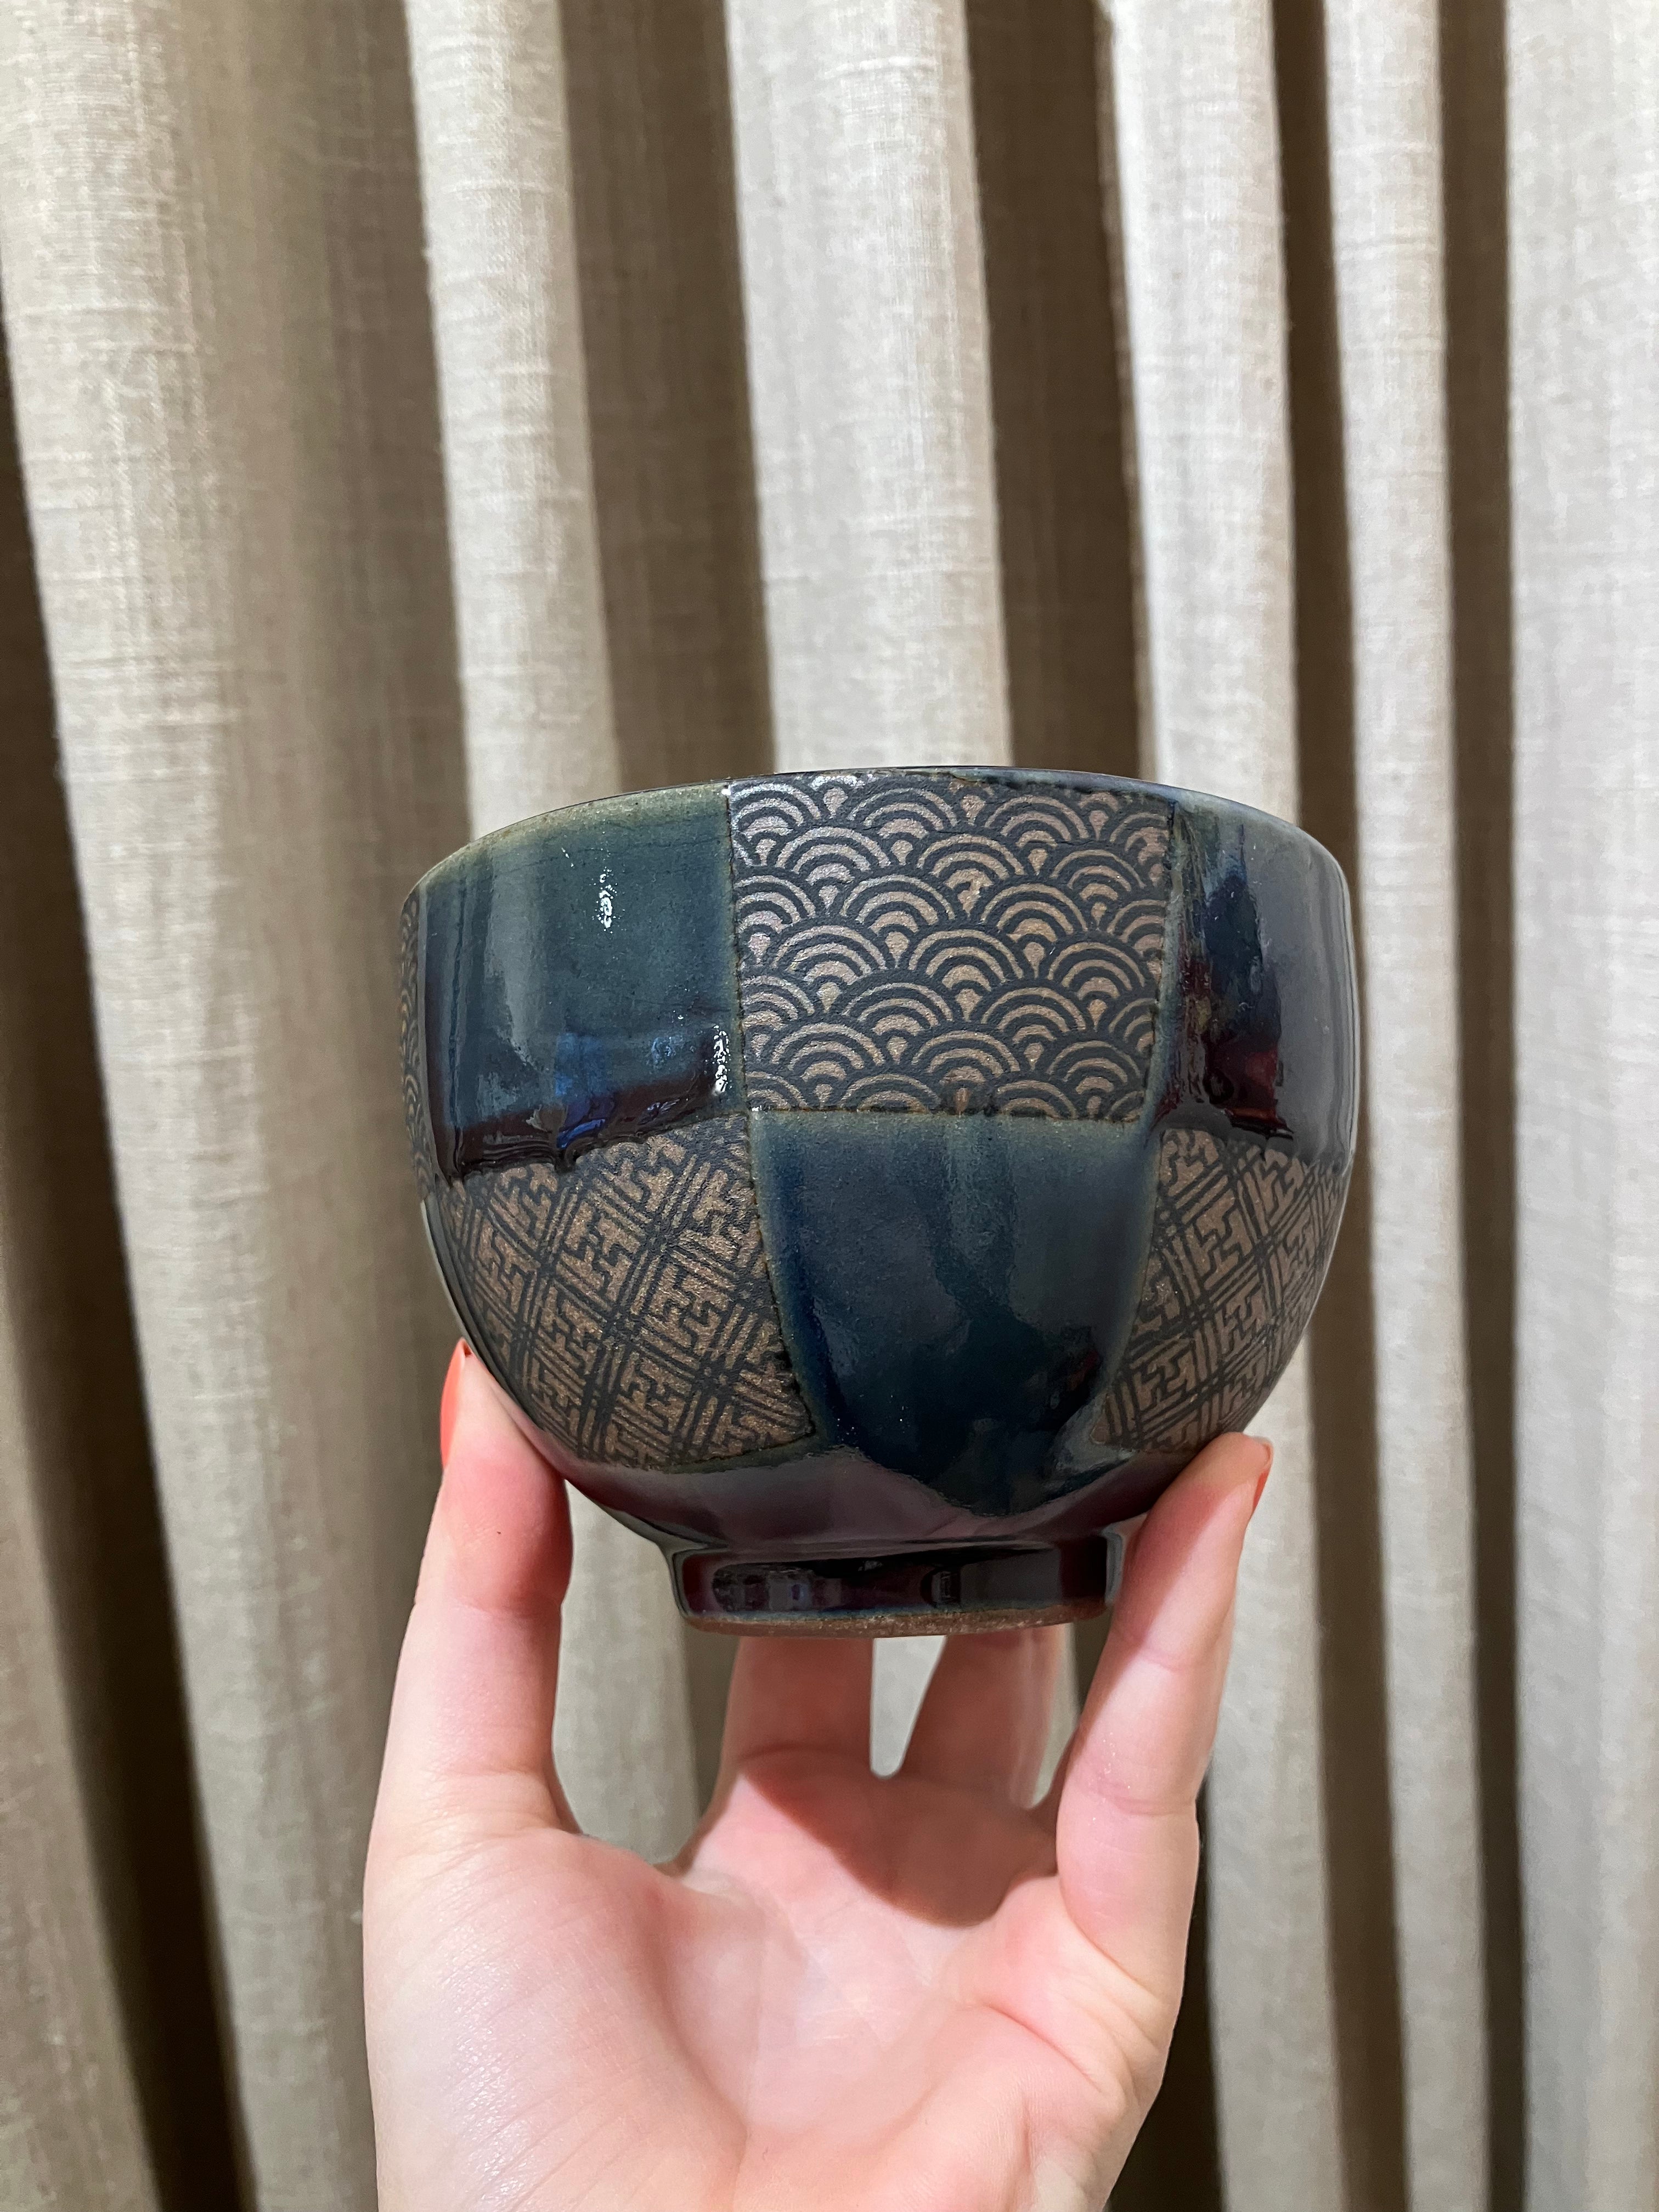 Ceramic bowl with blue checks and Japanese patterns